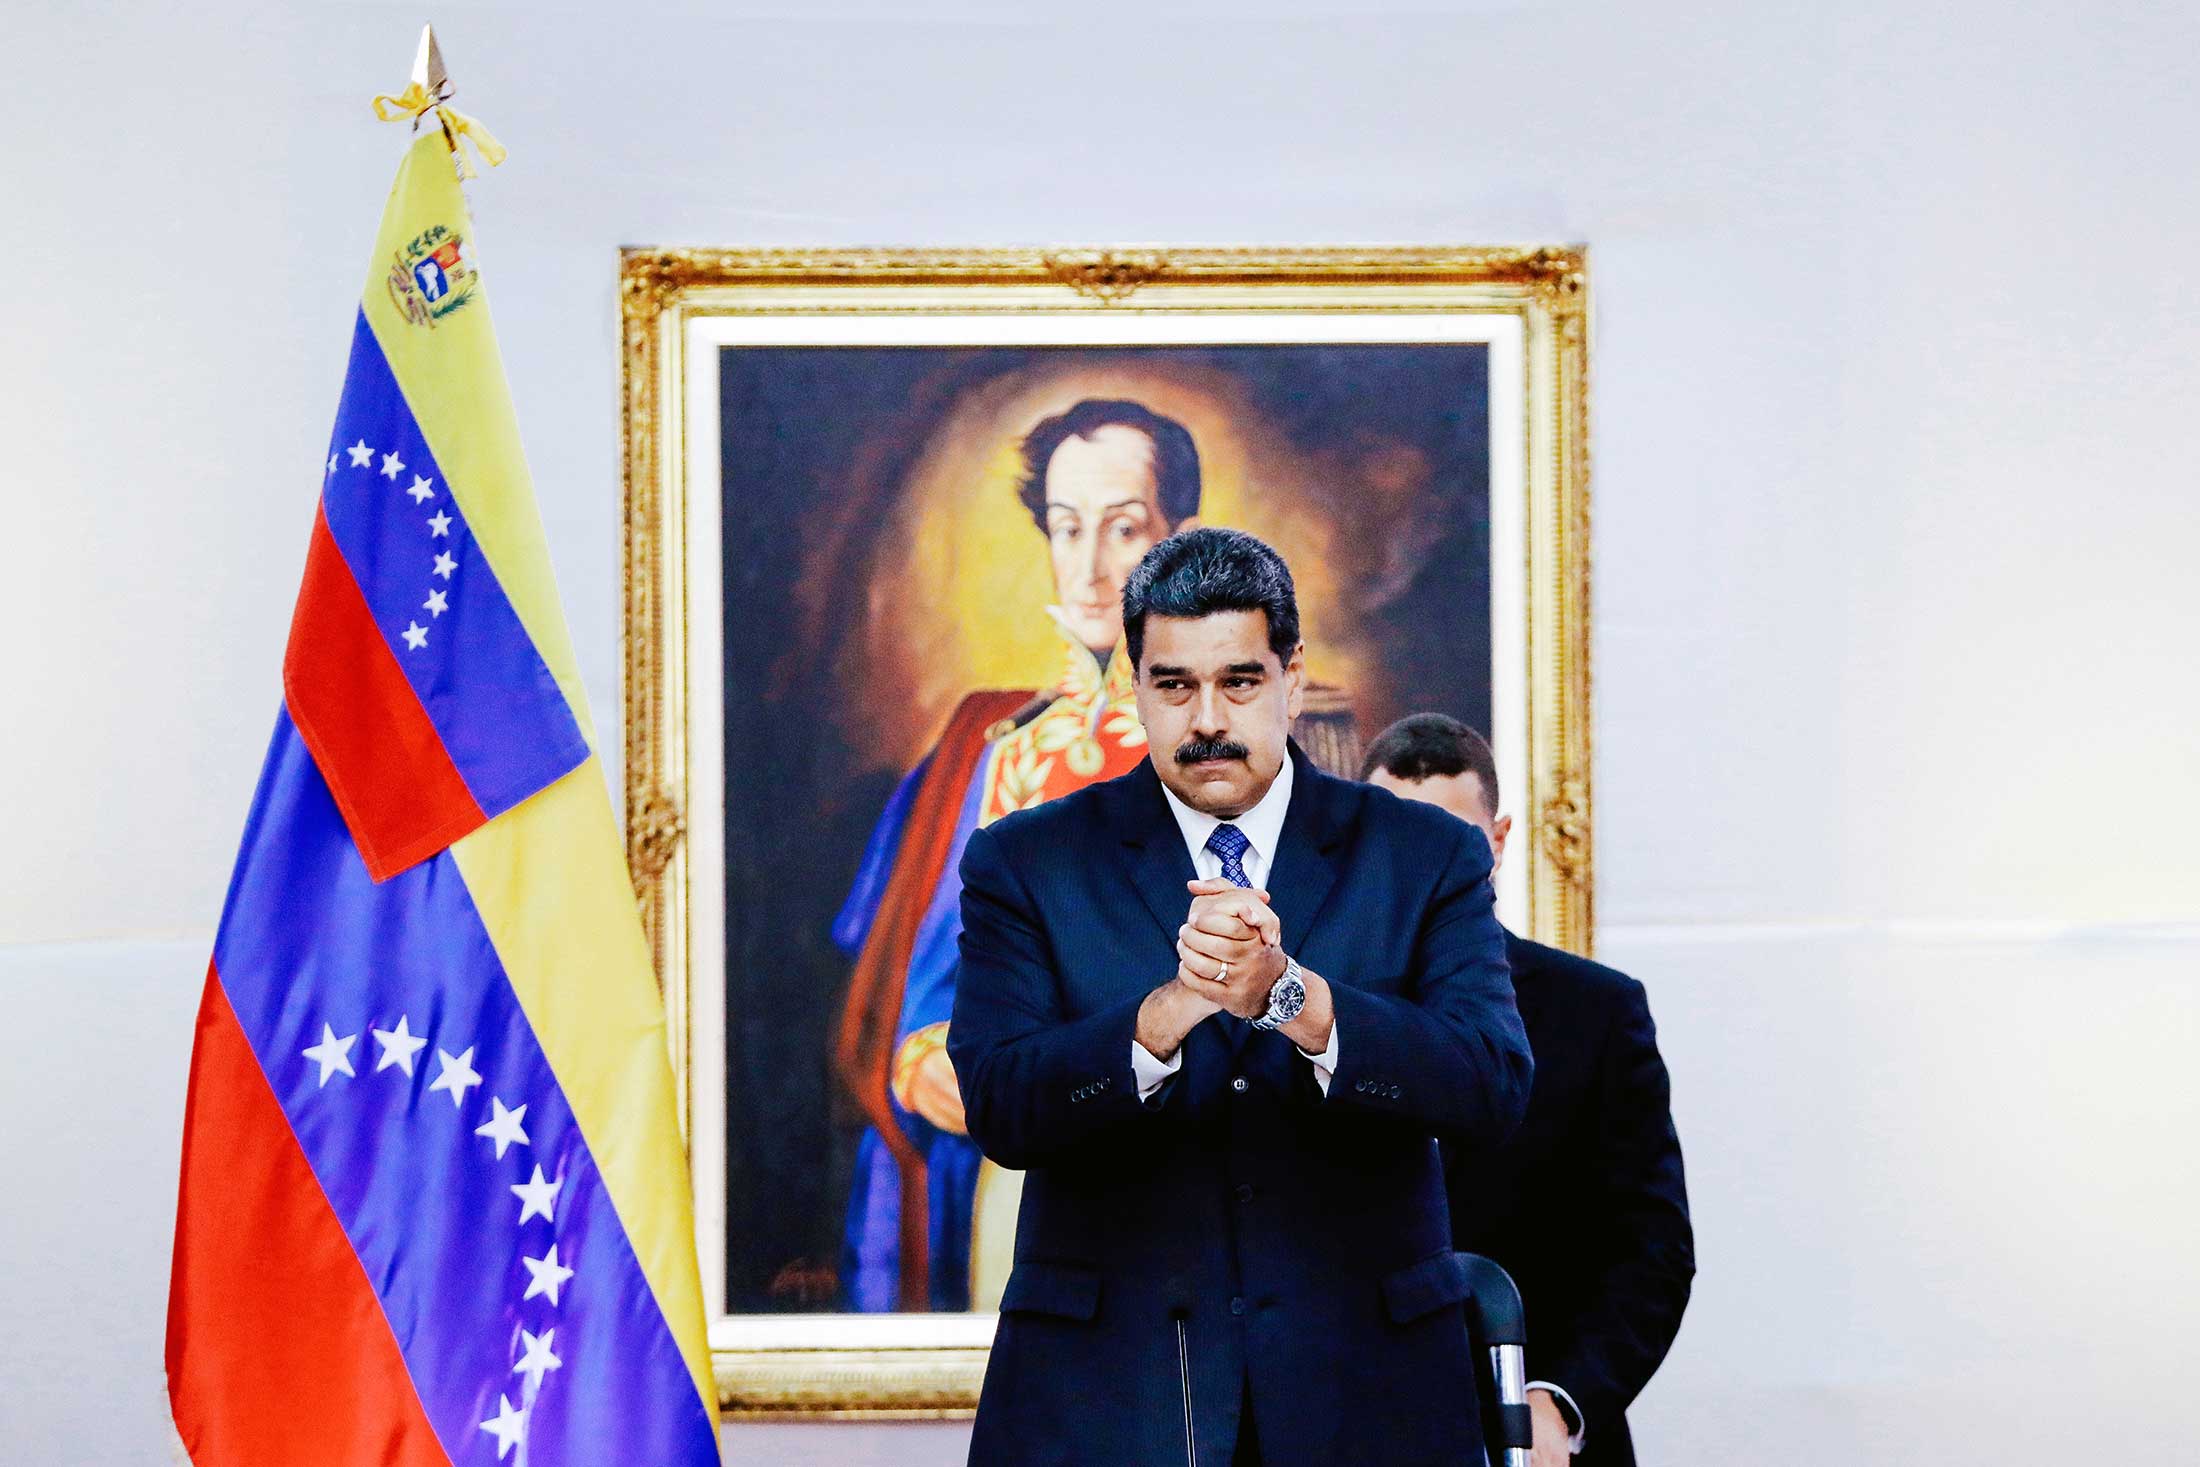 Venezuela President Nicolás Maduro greets international observers for the election at the presidential palace in Caracas, Venezuela, on Friday.